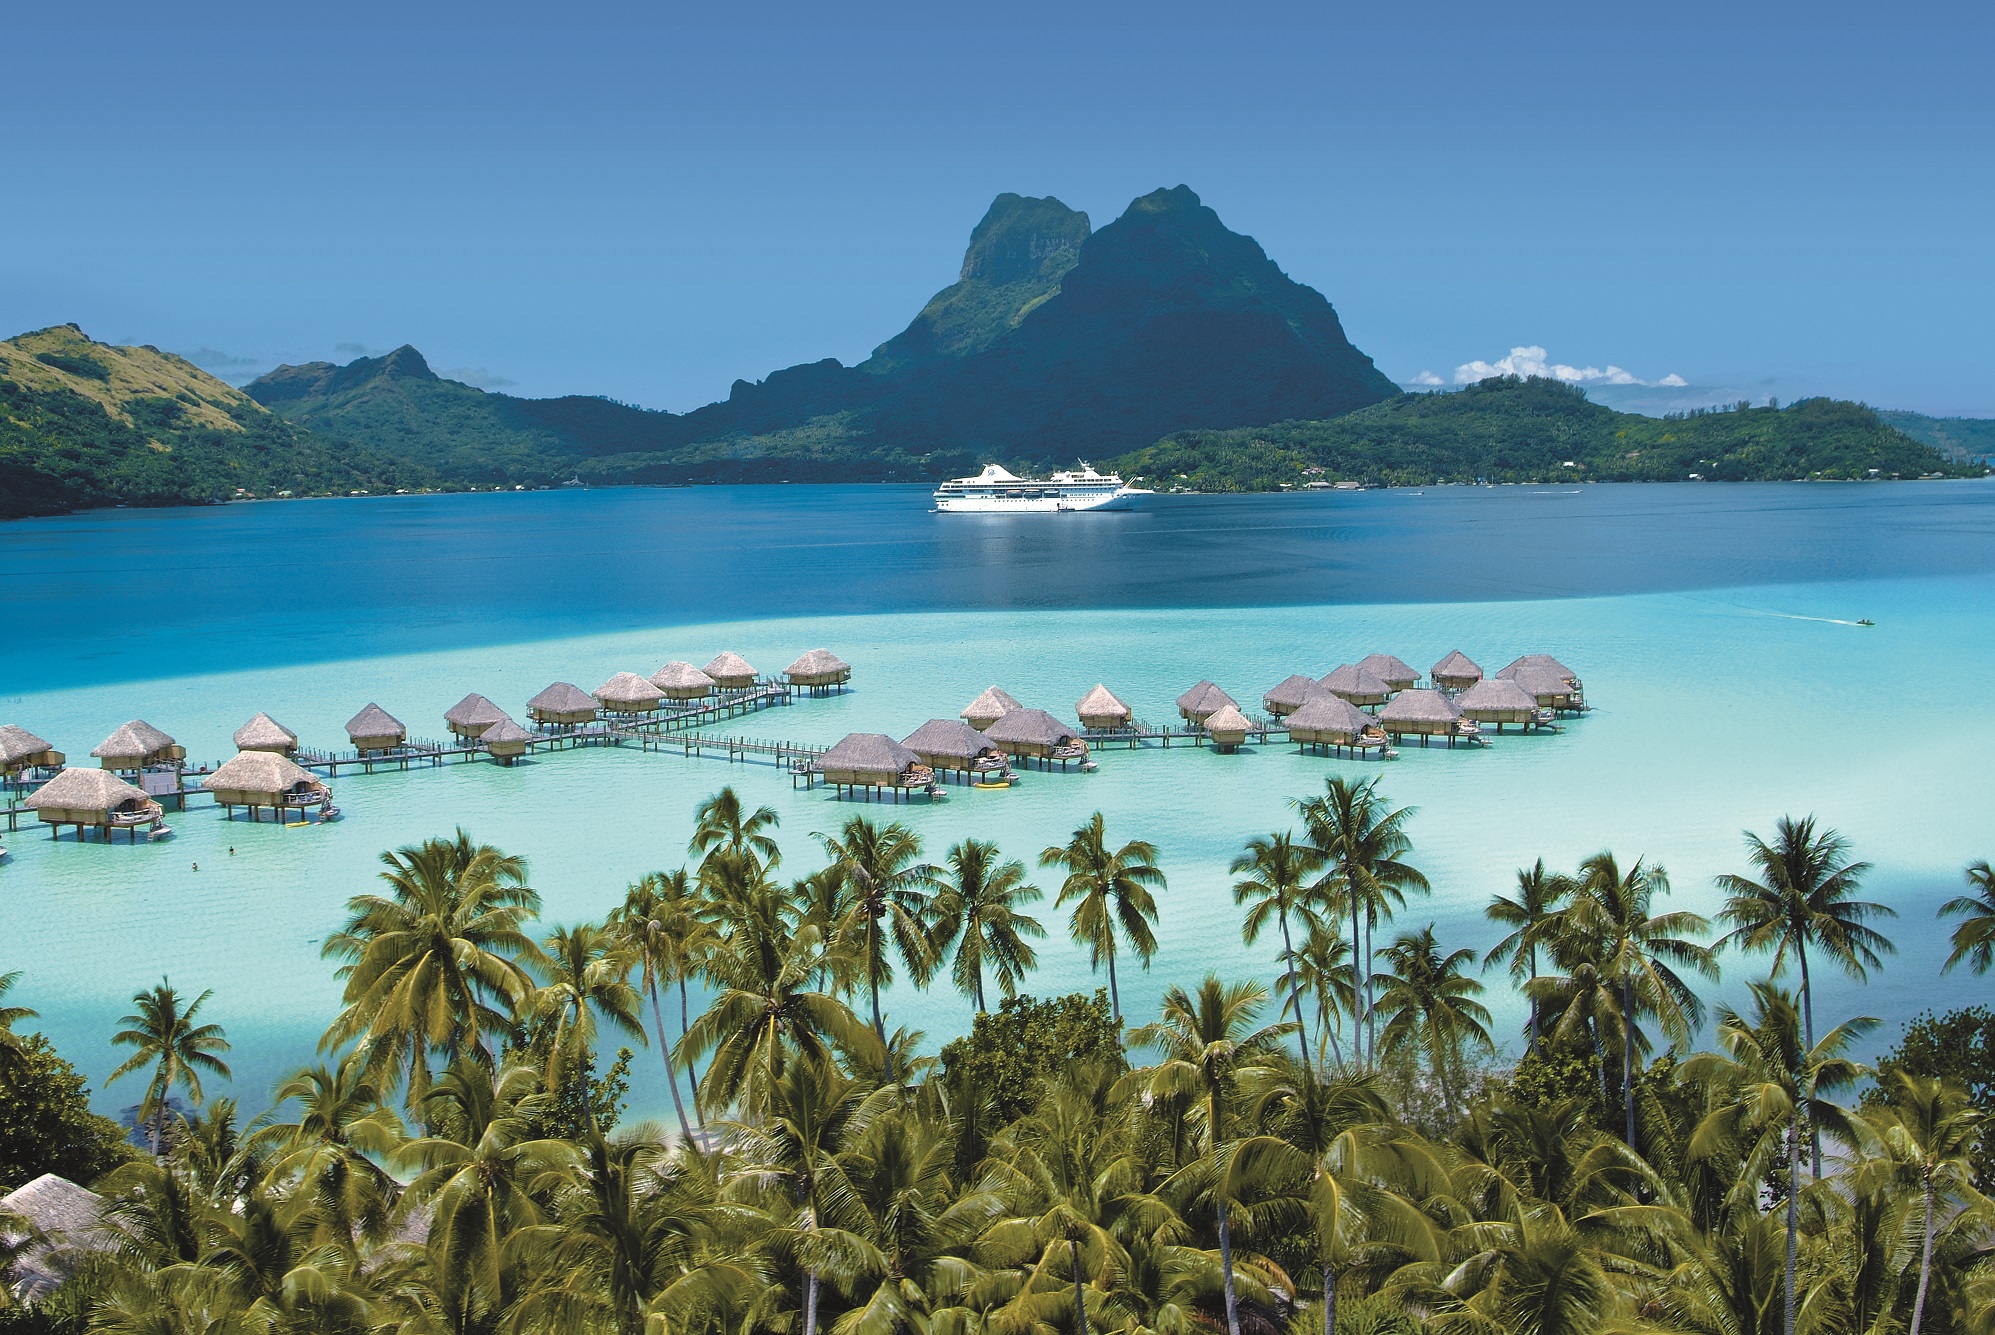 Built specifically to navigate the islands of French Polynesia, The Gauguin features a small size that allows her to maneuver from open ocean to shallow lagoon as nimbly as a yacht.